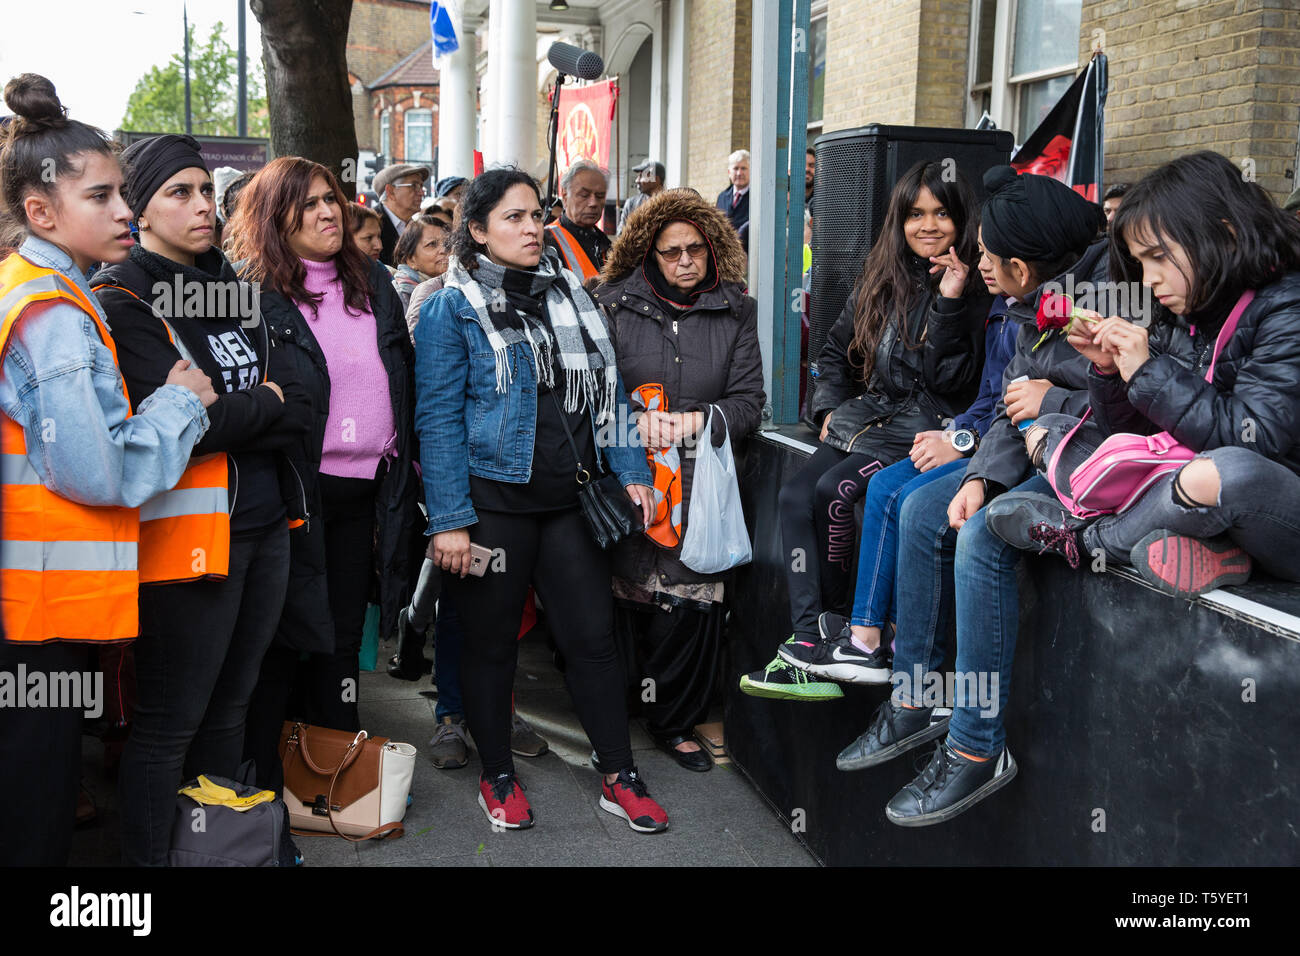 Southall, UK. 27th April 2019. Members of the local community attend a rally outside Southall Town Hall to honour the memories of Gurdip Singh Chaggar and Blair Peach on the 40th anniversary of their deaths. Gurdip Singh Chaggar, a young Asian boy, was the victim of a racially motivated attack whist Blair Peach, a teacher, was killed by the Metropolitan Police’s Special Patrol Group during a peaceful march against the National Front demonstration. Credit: Mark Kerrison/Alamy Live News Stock Photo